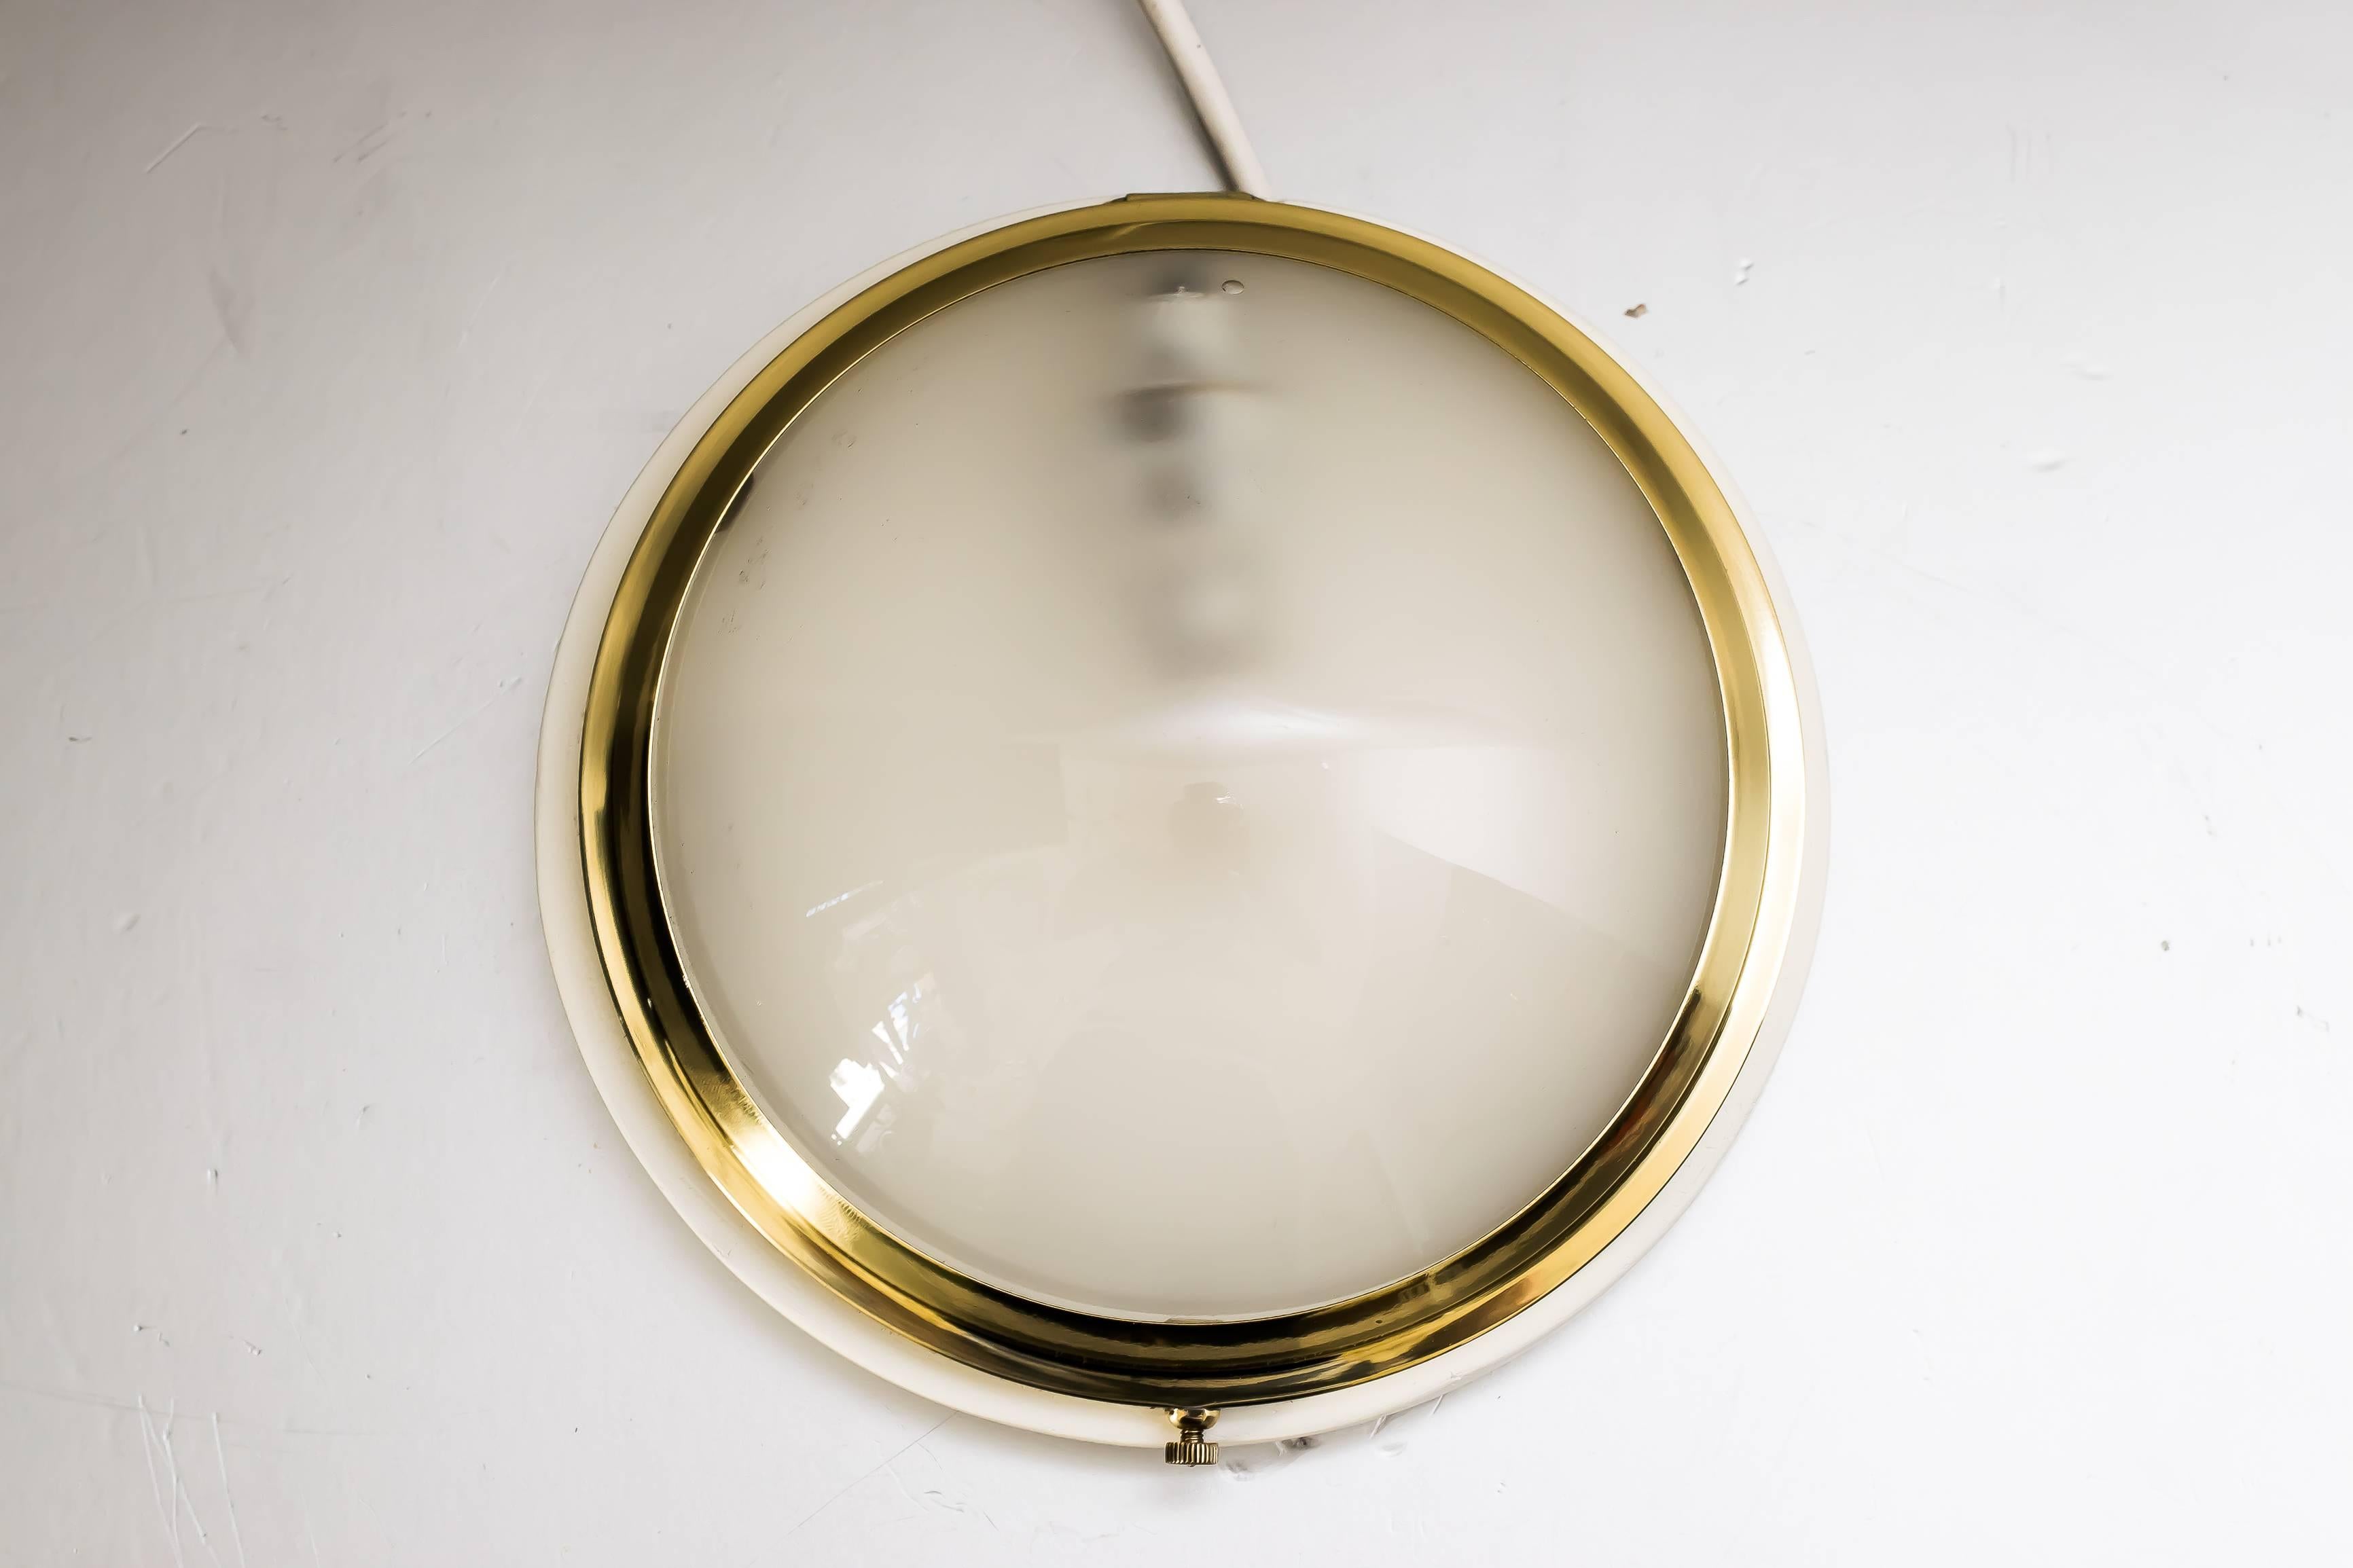 Lacquered Small Art Deco Ceiling or Wall Lamp, circa 1920s